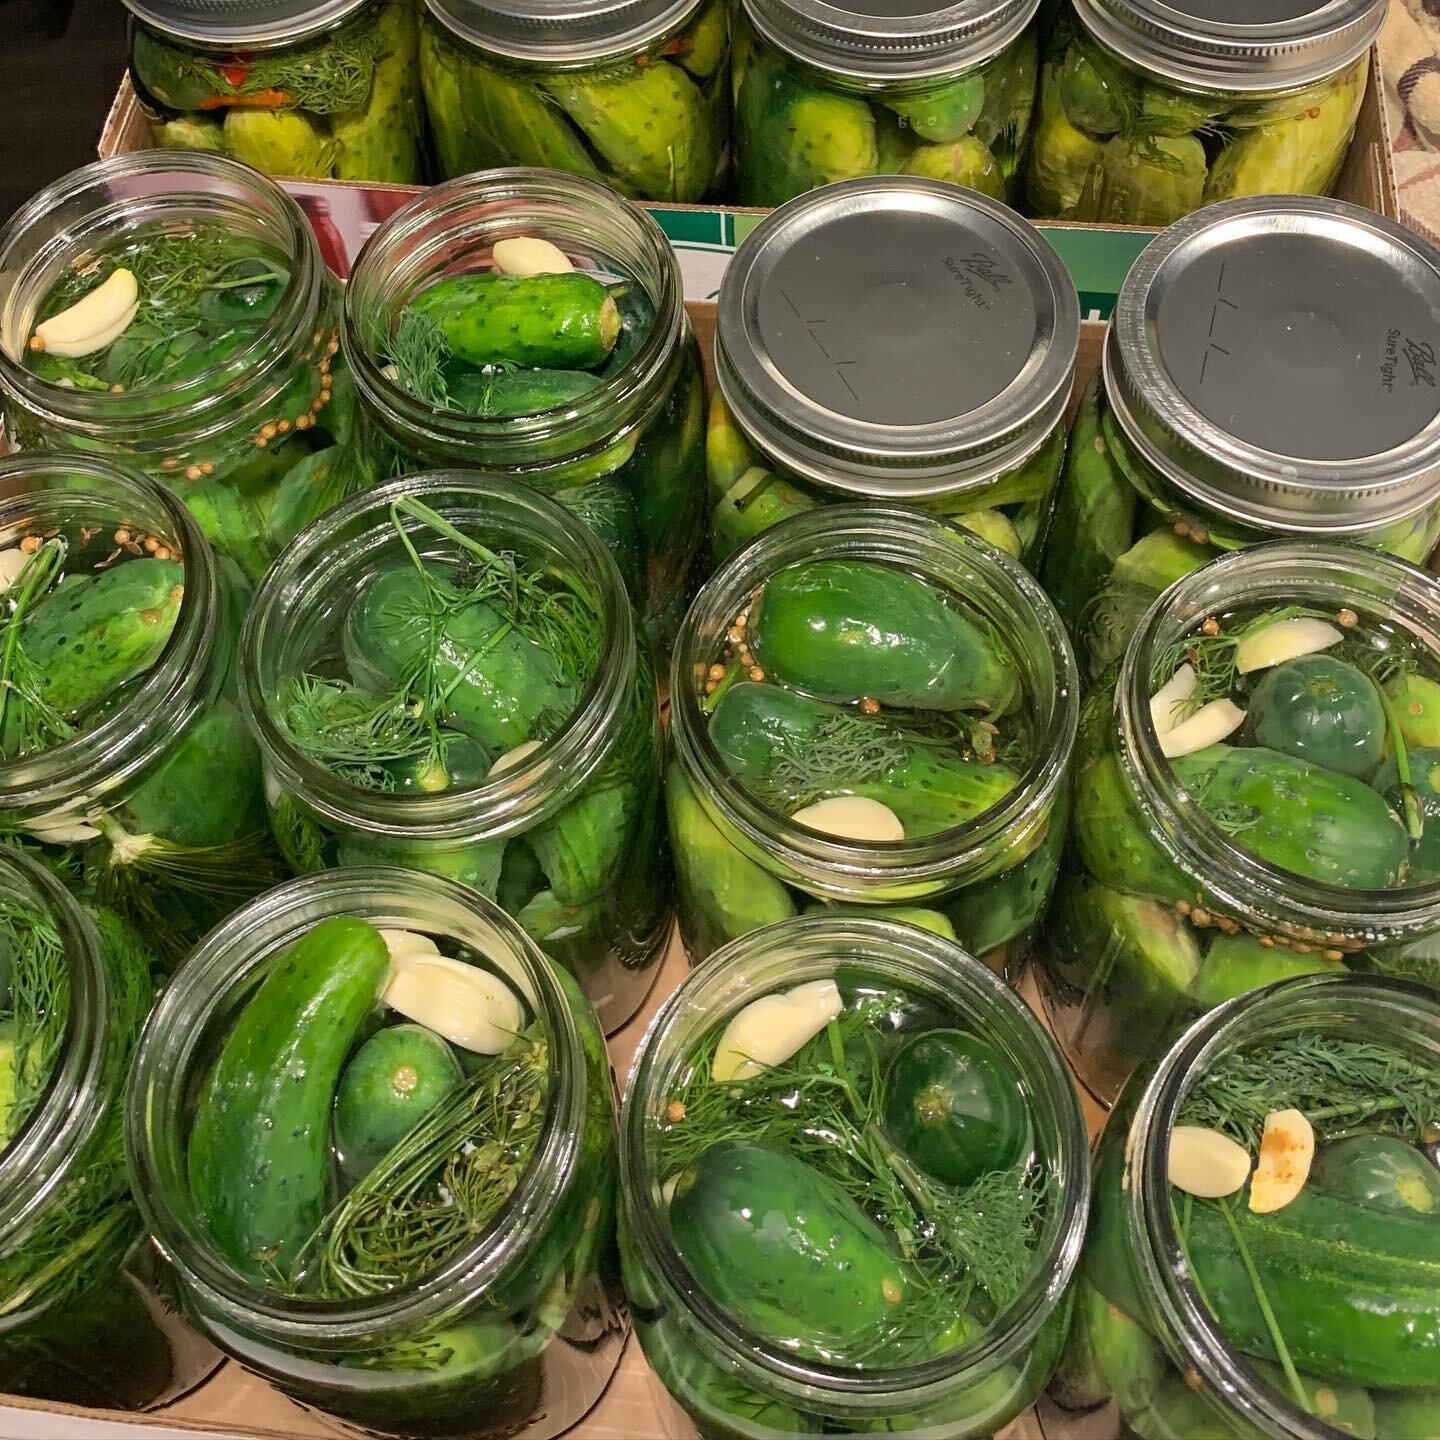 lid them up!

bad days suck. spice it up with our swag. 

#pickles #dillpickles #gherkins #fermentedfoods #homemadepickles #picklesarelife #gherkinsarelife #nobigdill #babycukes #babycukesarethebest